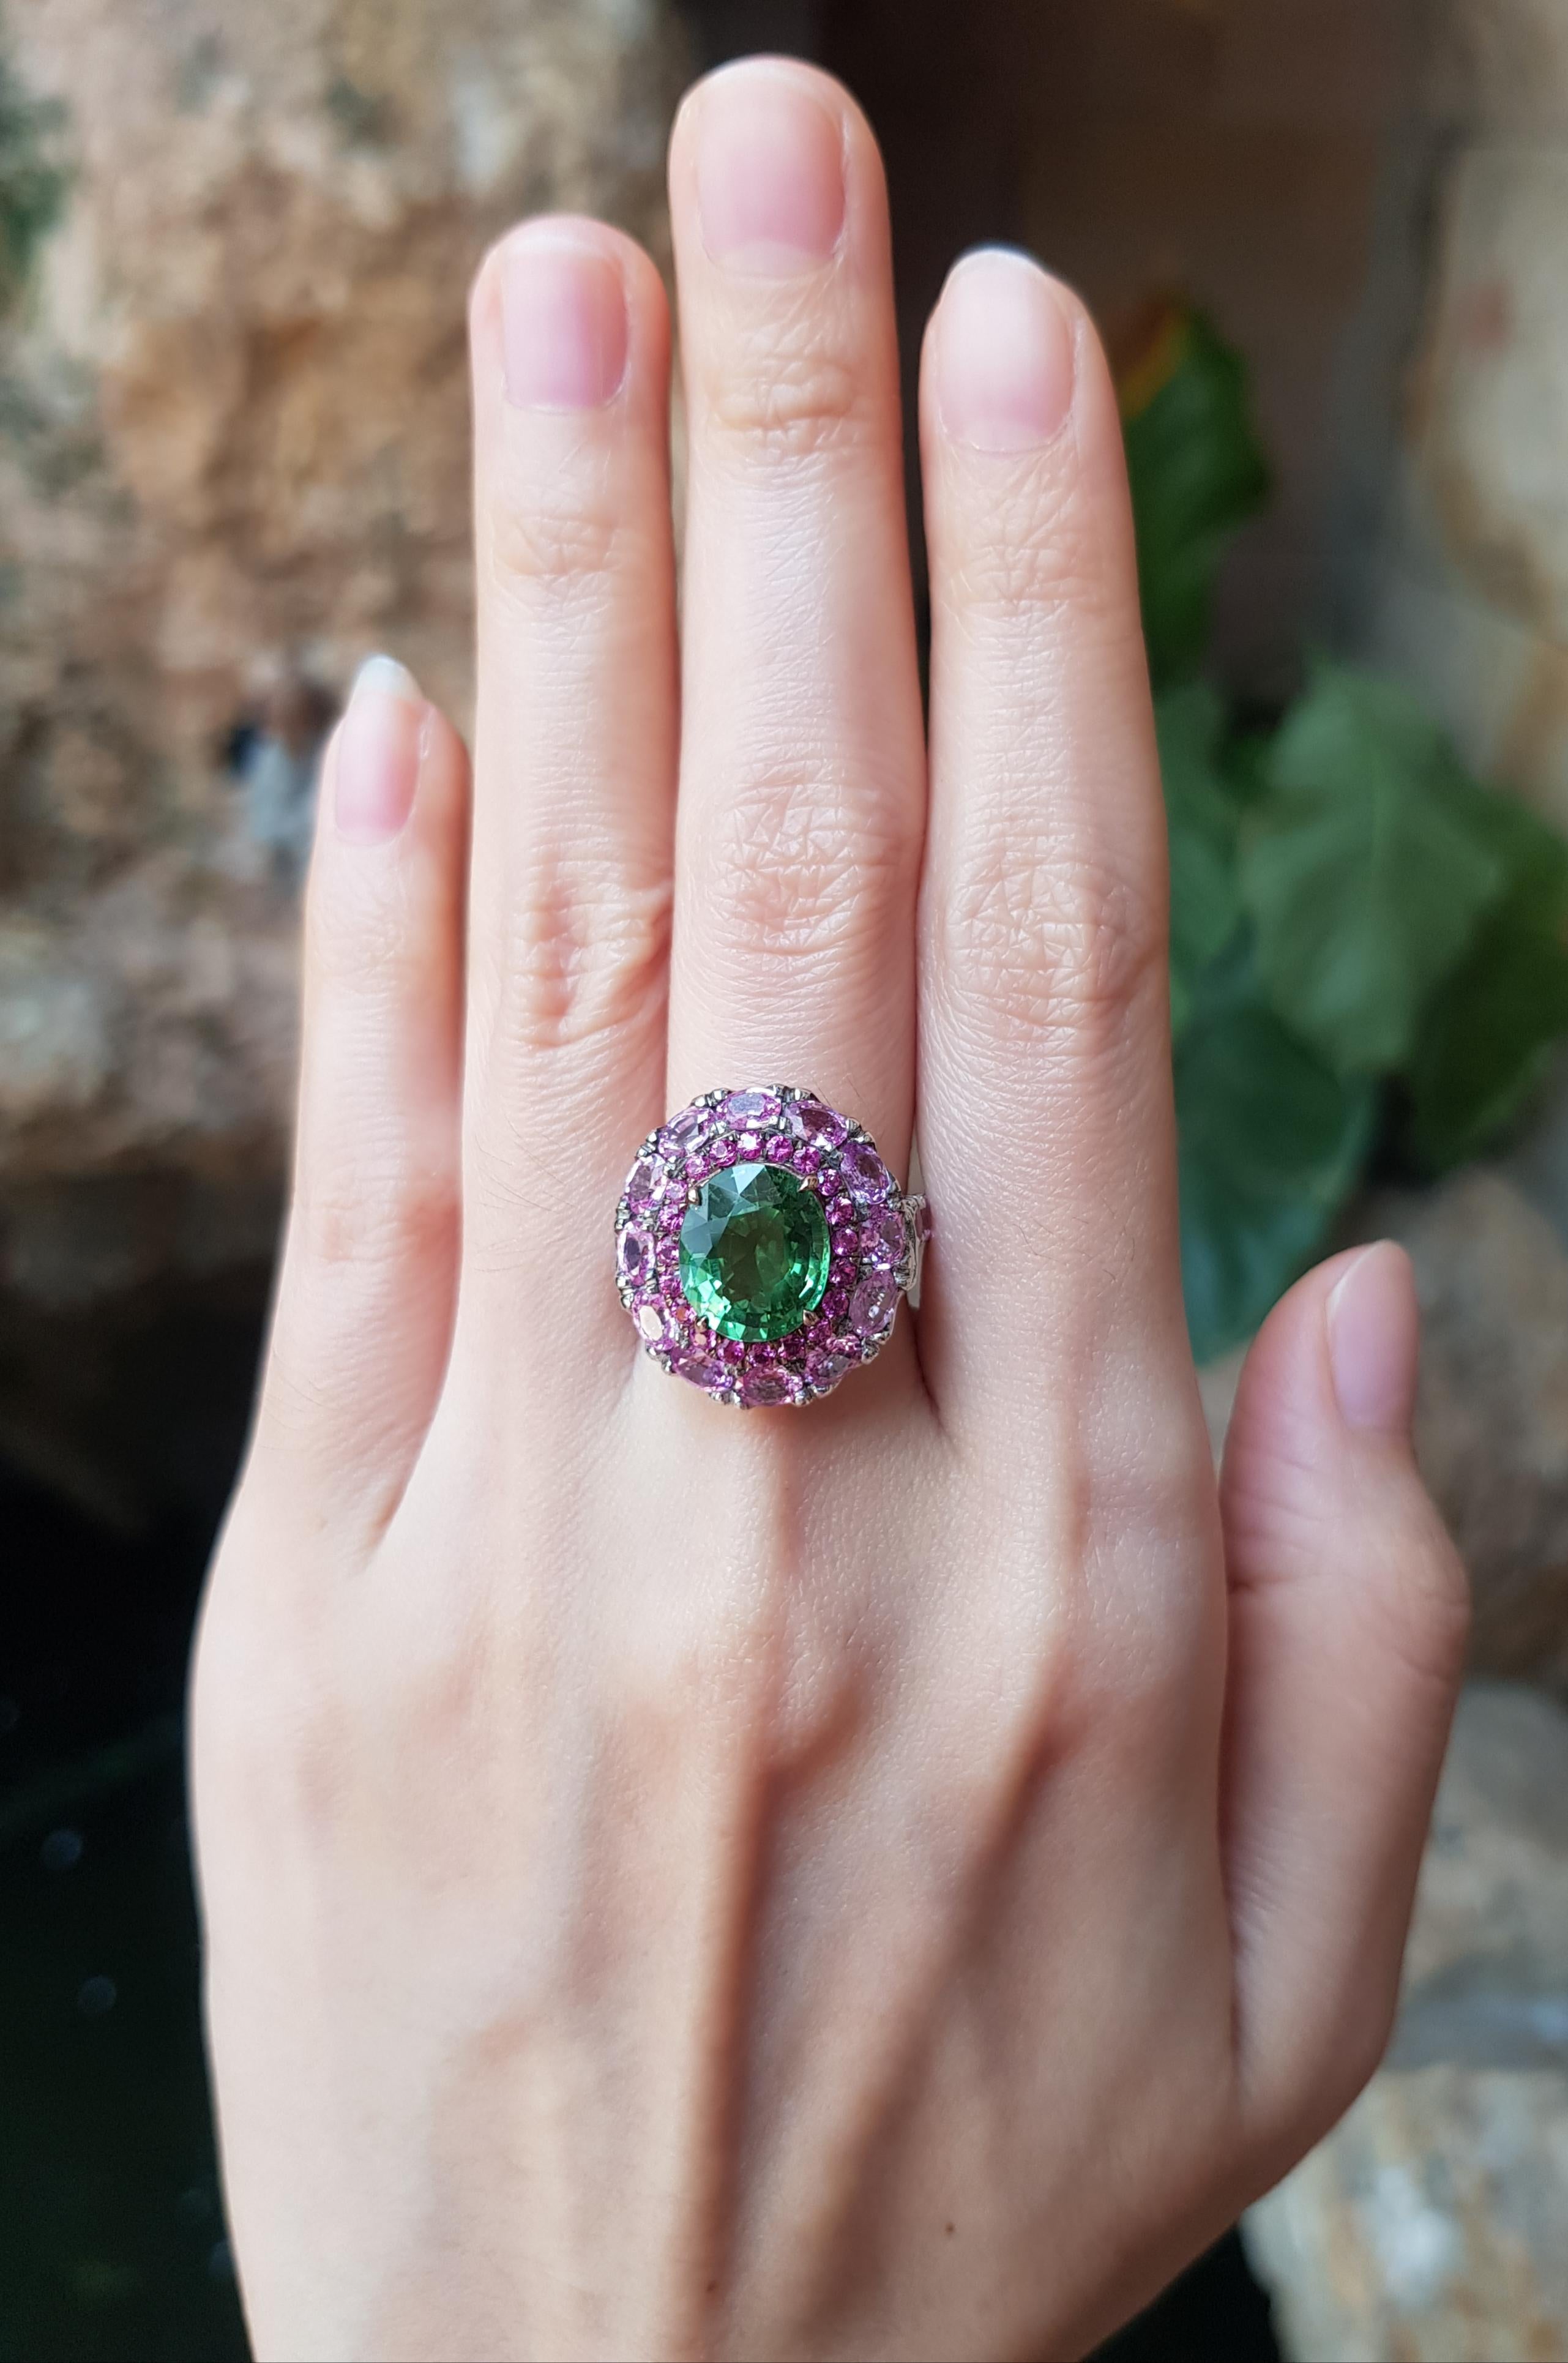 Green Tourmaline 3.52 carats with Pink Sapphire 4.13 carats Ring set in 18 Karat White Gold Settings

Width:  1.7 cm 
Length: 2.0 cm
Ring Size: 55
Total Weight: 9.57 grams



